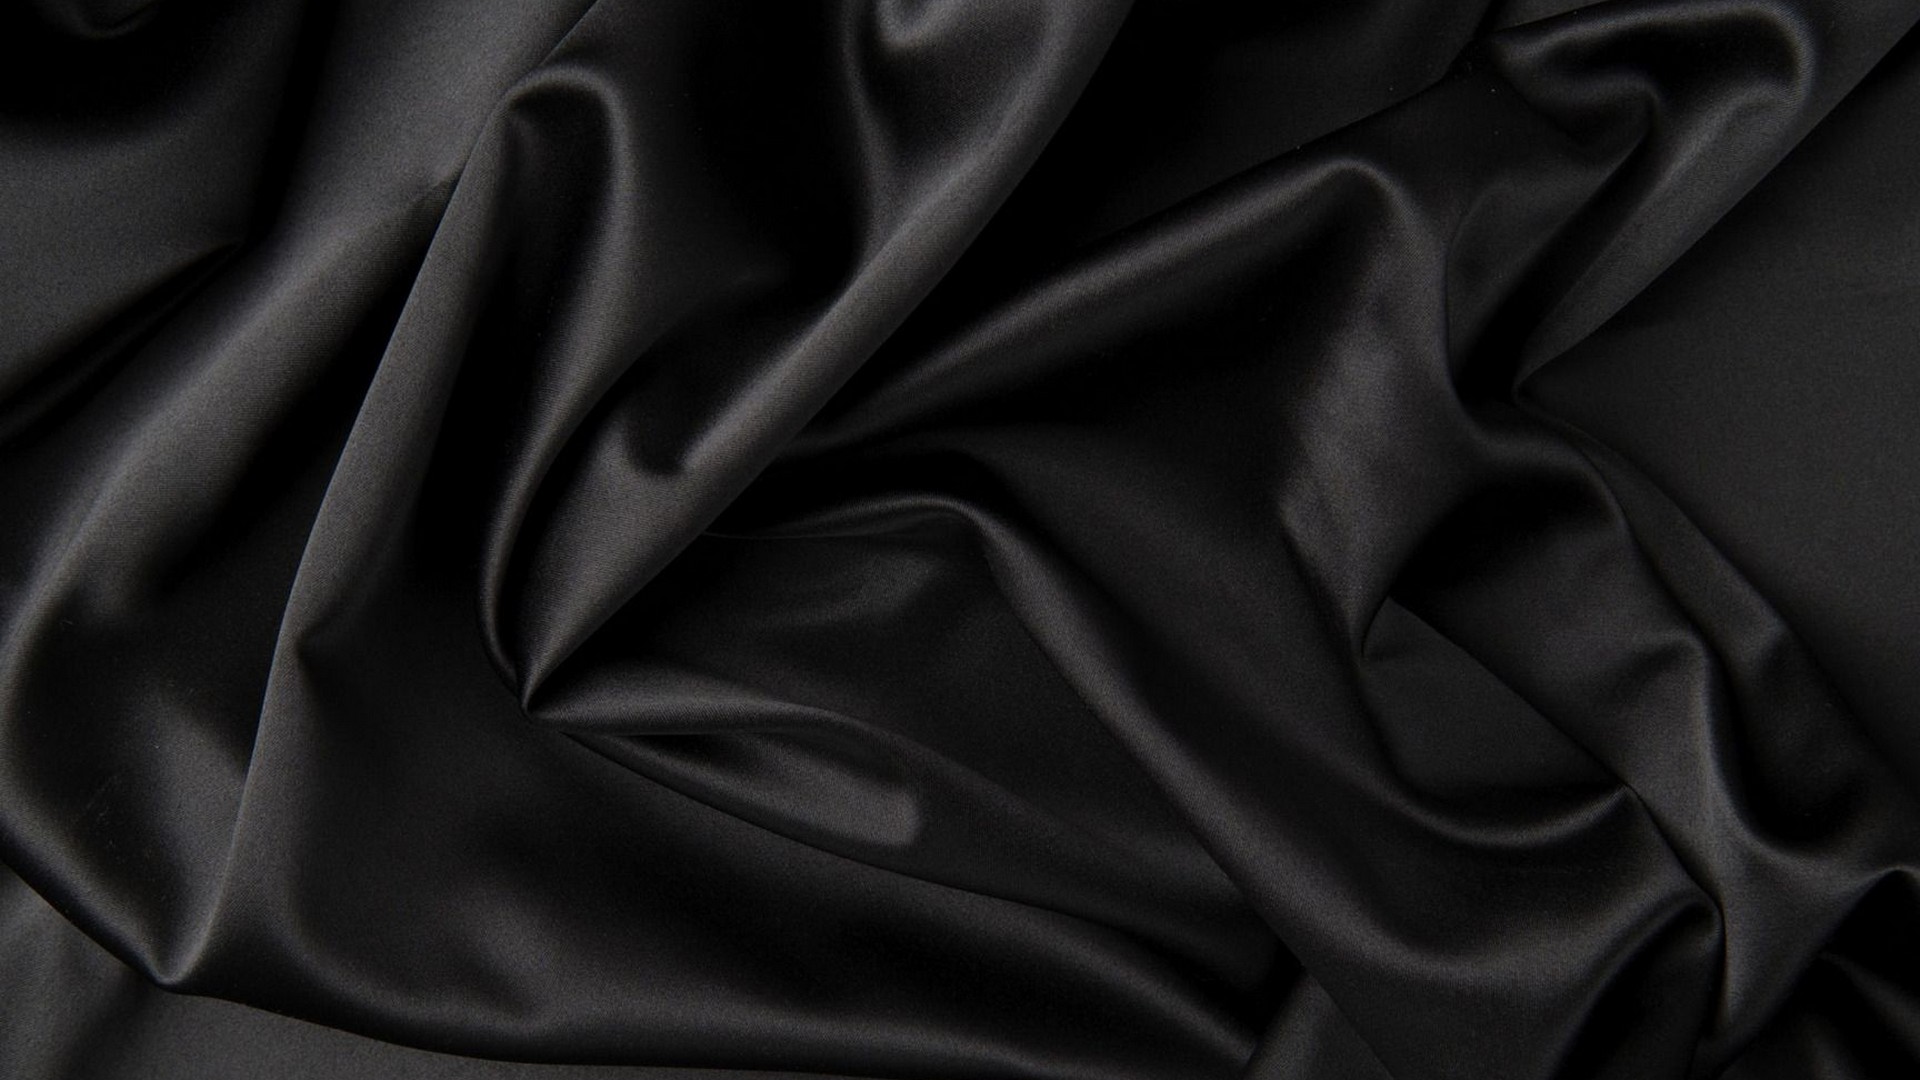 Black Silk Background Wallpaper HD with high-resolution 1920x1080 pixel. You can use this wallpaper for your Desktop Computer Backgrounds, Mac Wallpapers, Android Lock screen or iPhone Screensavers and another smartphone device